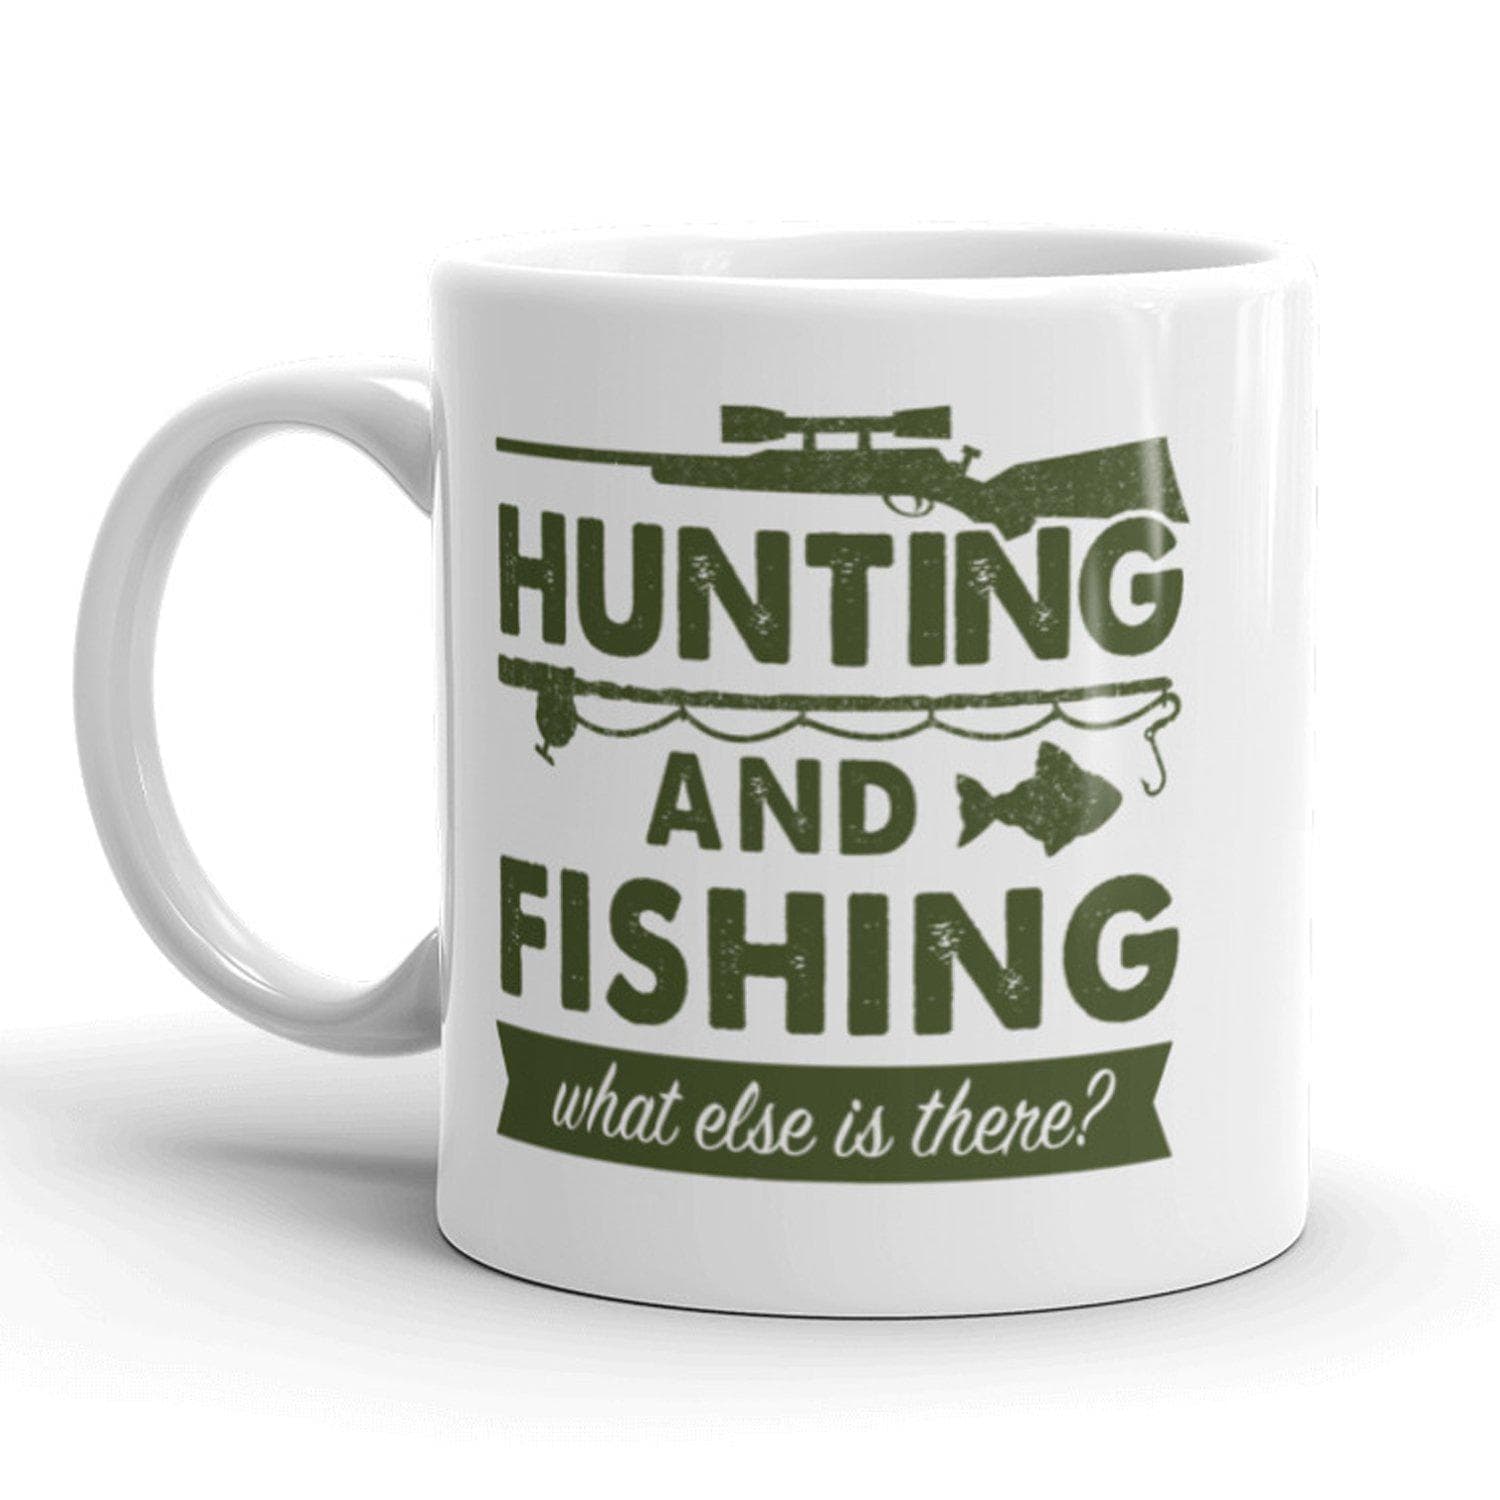 Hunting And Fishing What Else Is There Mug - Crazy Dog T-Shirts